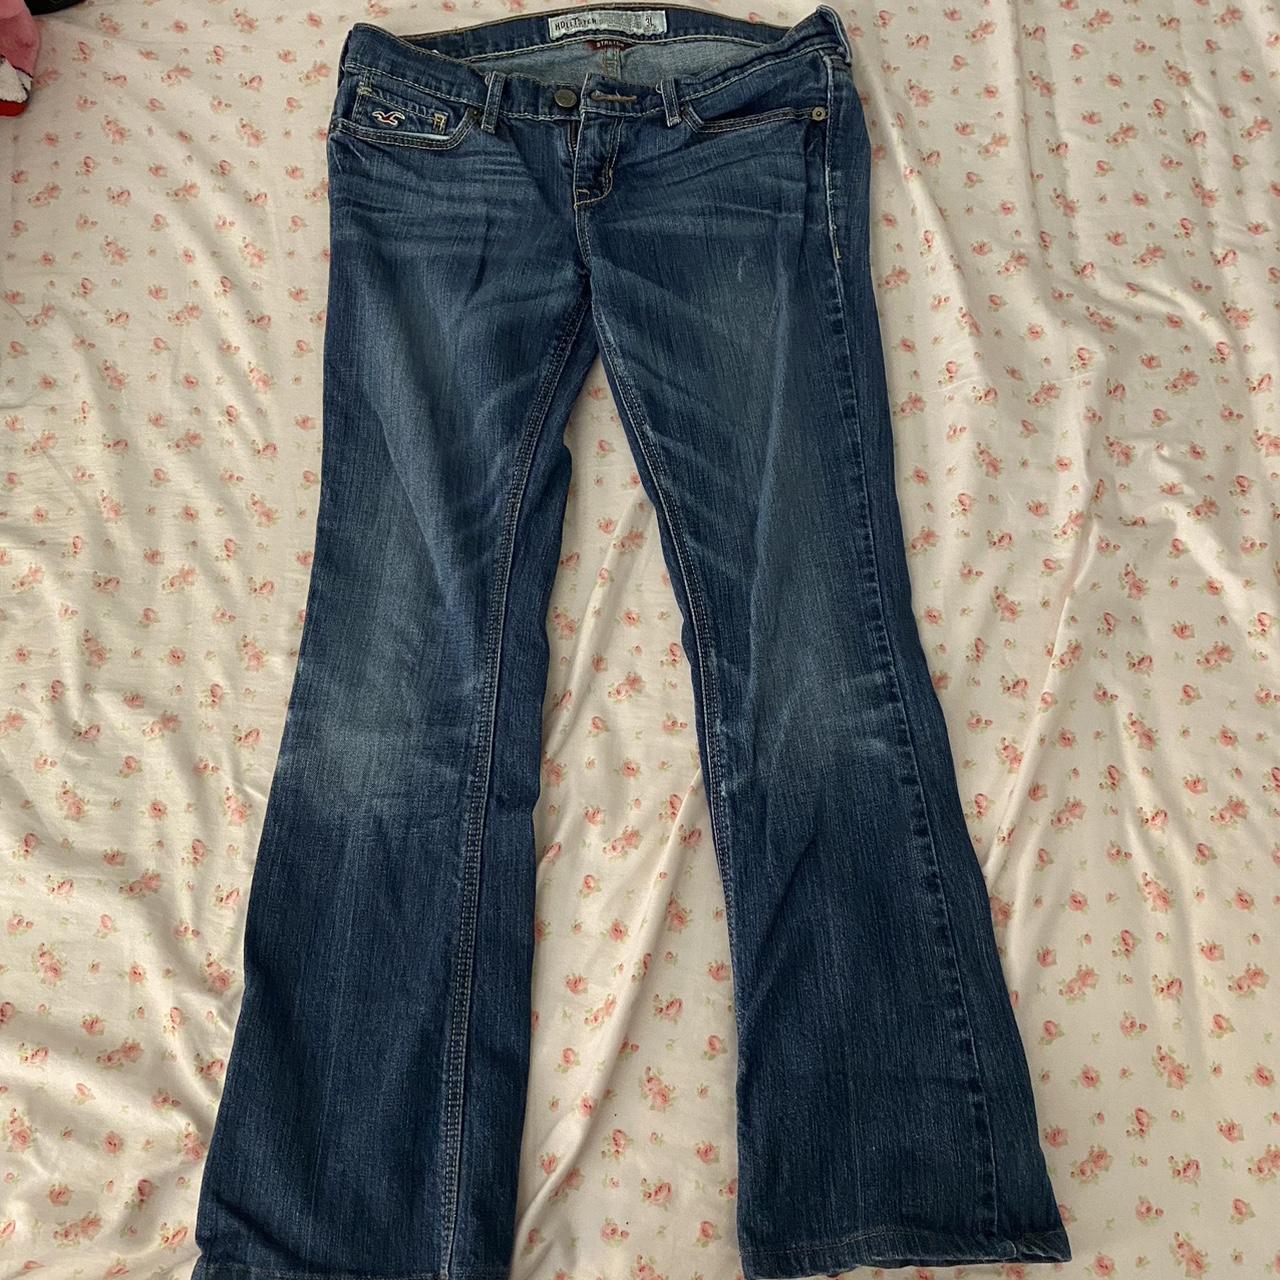 Hollister low rise flared jeans! LOVE THESE JEANS... - Depop